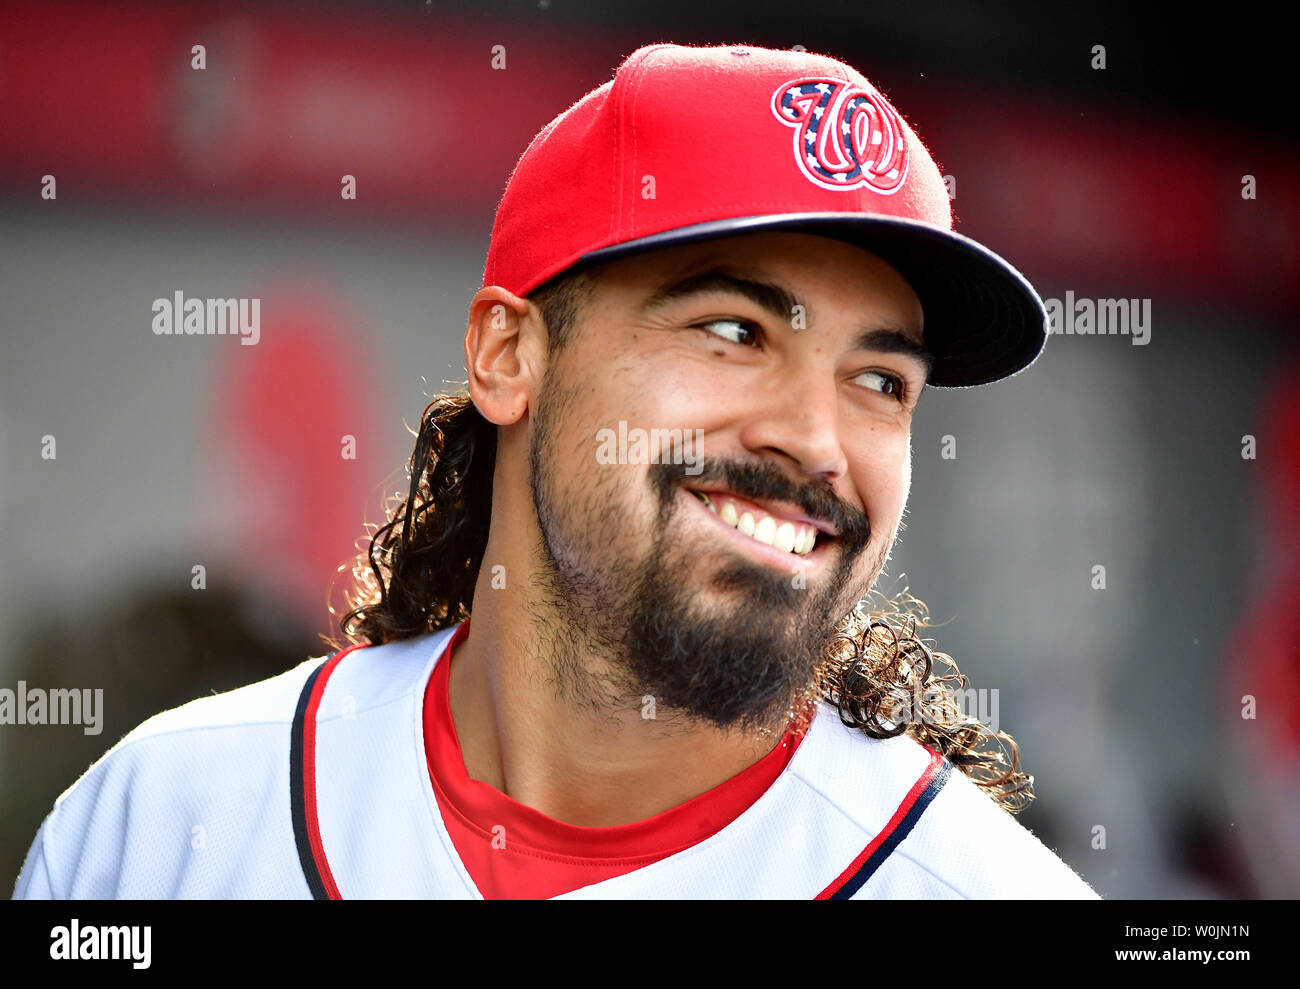 Washington Nationals third baseman Anthony Rendon (6) is seen in the dugout as the Nationals play the Miami Marlins at Nationals Park in Washington, D.C. on August 30, 2017. Photo by Kevin Dietsch/UPI Stock Photo